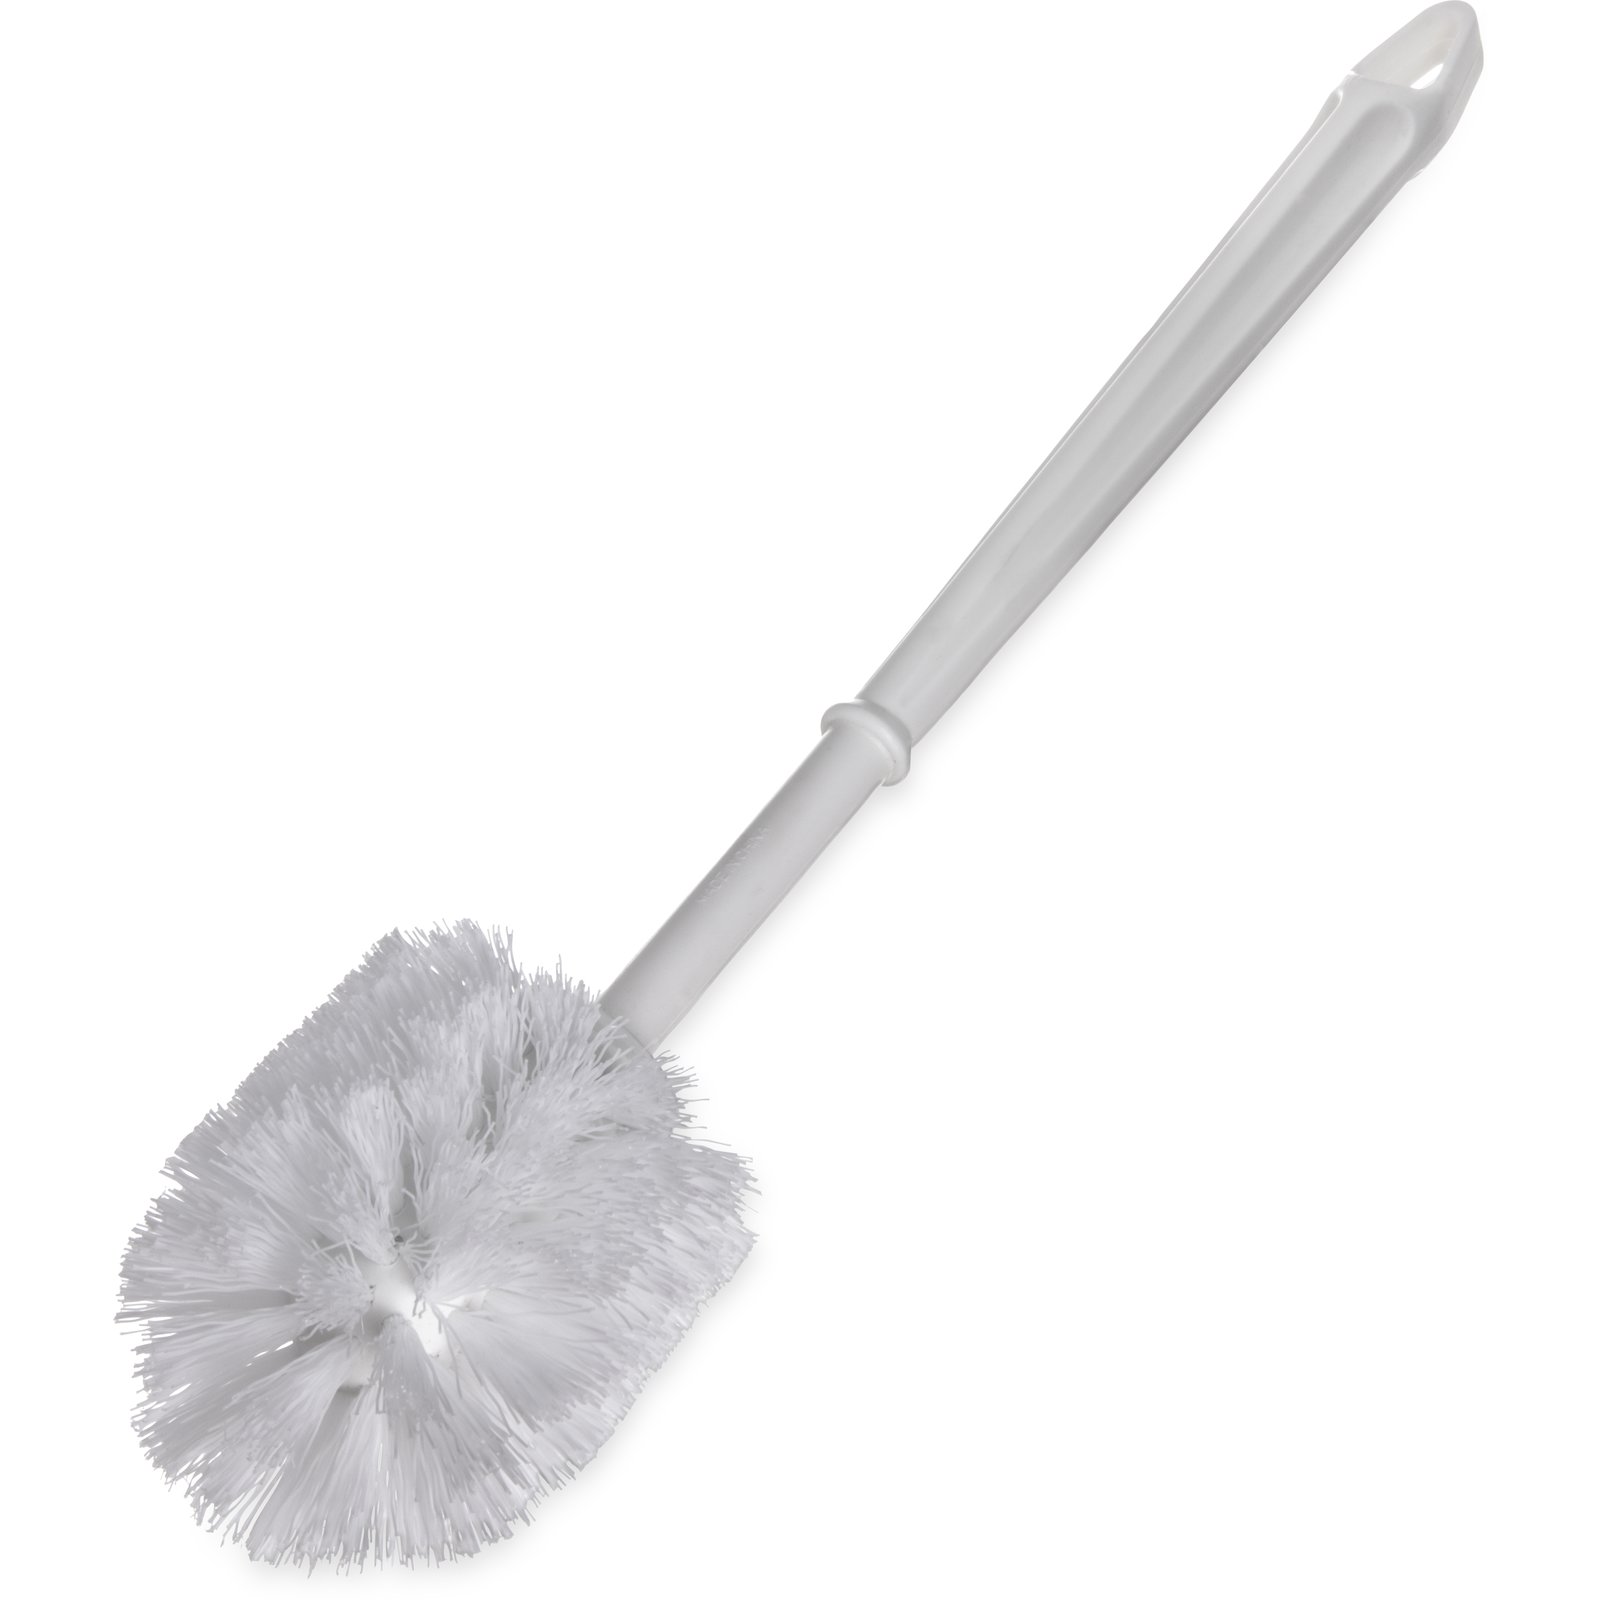 Plastic Washing Brush With Flexible Bristles For Cleaning Cloth 14x5 Cm Set  Of 2